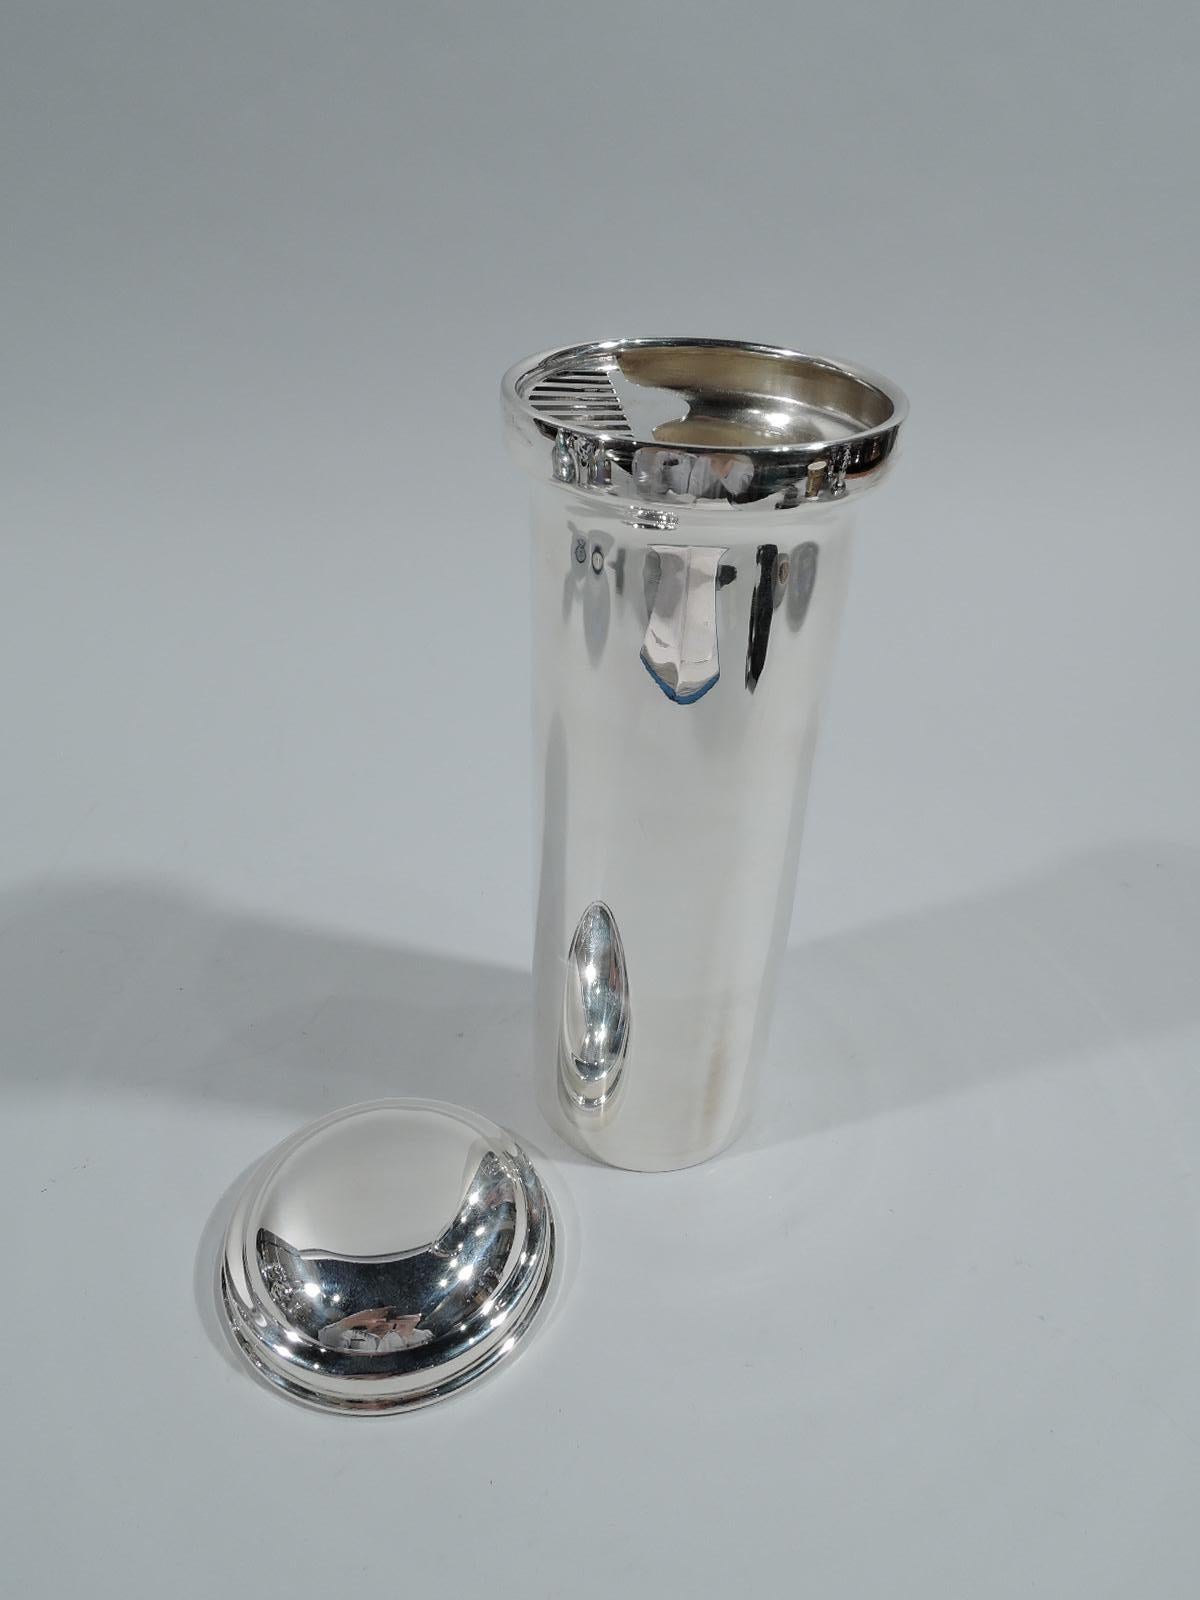 Art Deco sterling silver cocktail shaker. Made by LG Balfour Co. in Attleboro, Mass., ca 1925. Tall cylinder with built-in strainer. Snug-fitting domed cover. A spare ornament-free vessel for functional fun. Fully marked including maker’s stamp and